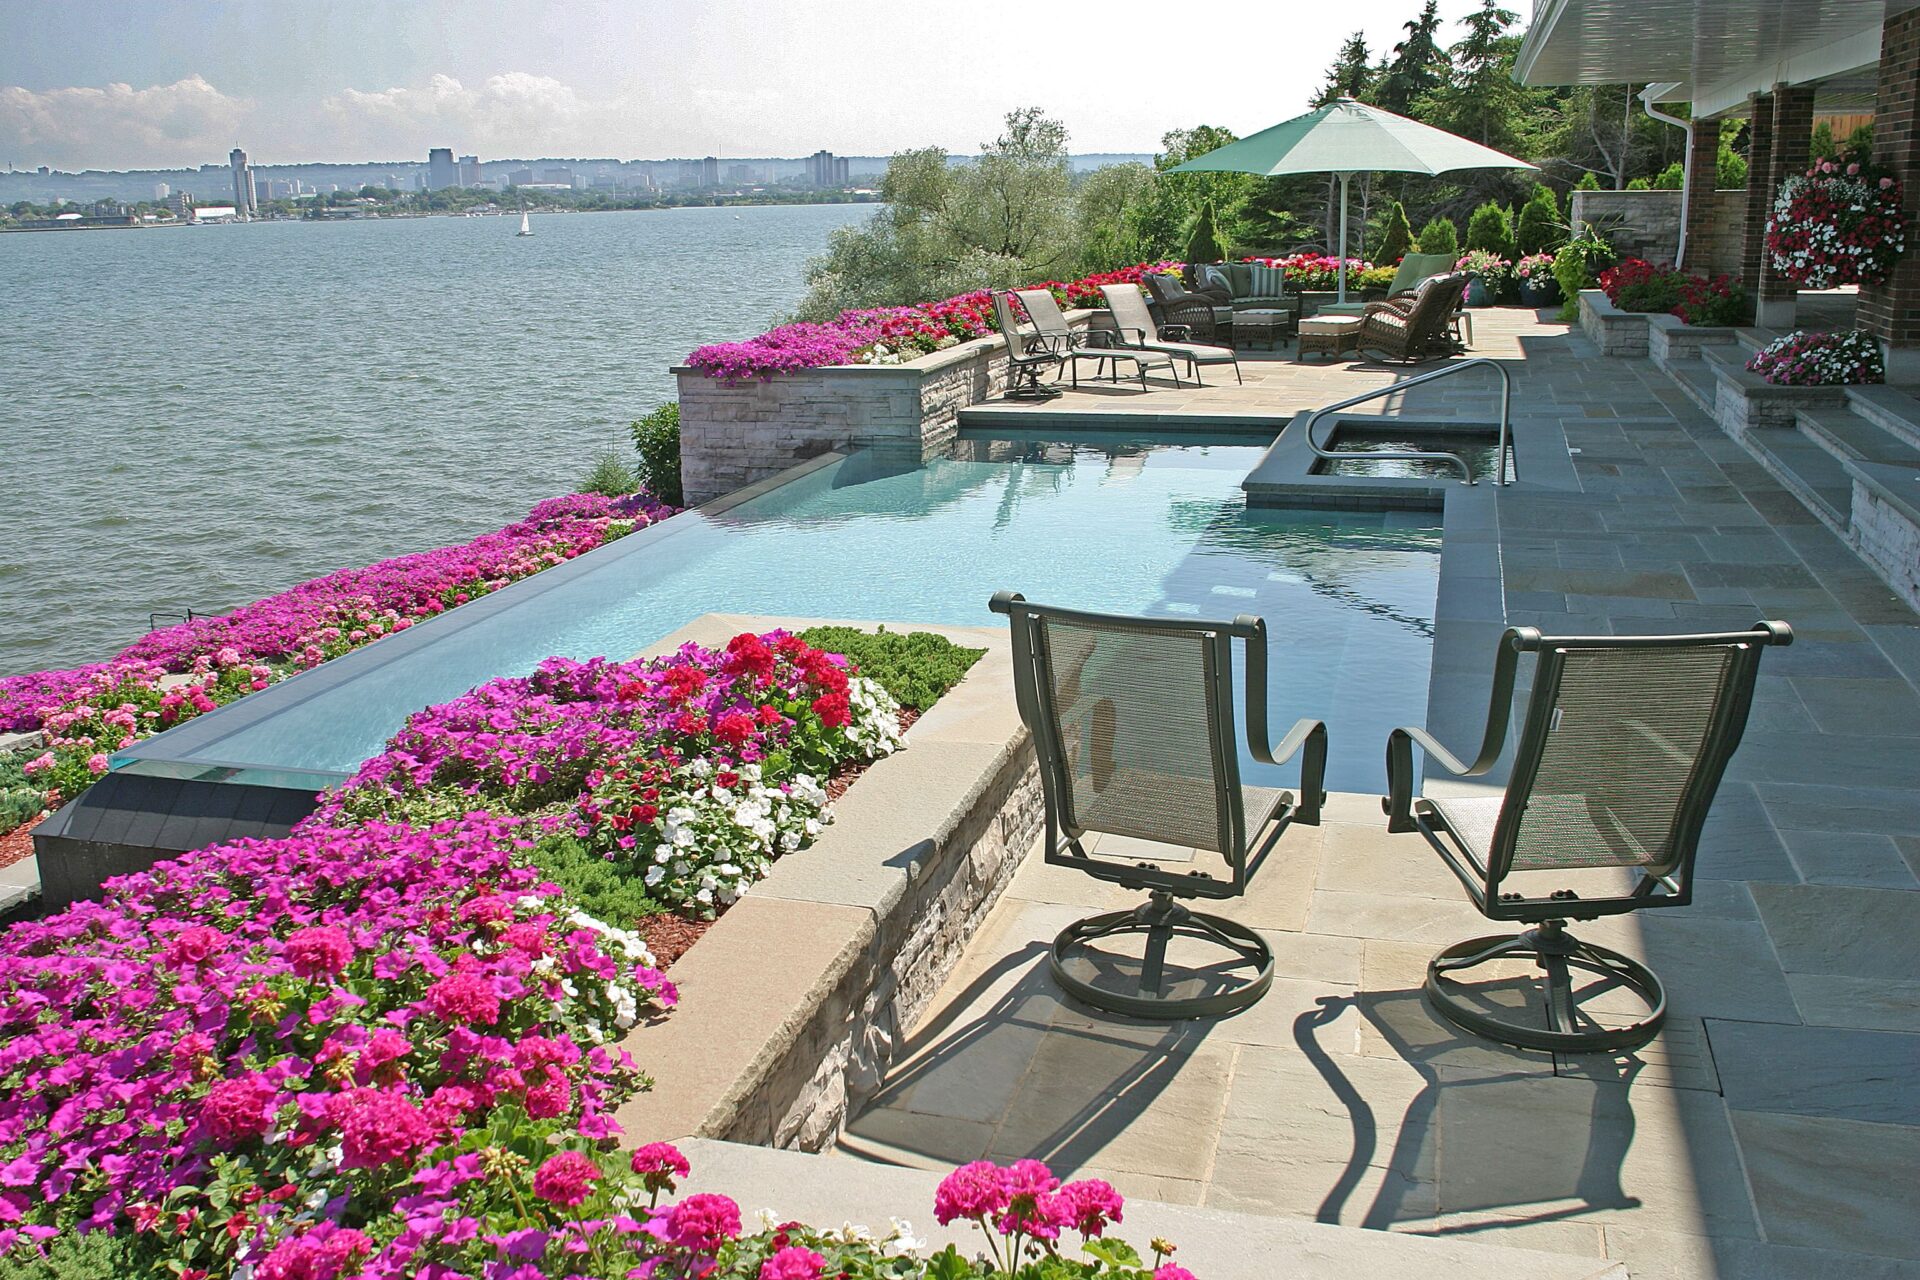 A luxurious outdoor pool area with patio chairs, overlooking a tranquil body of water surrounded by vibrant pink and white flowers.